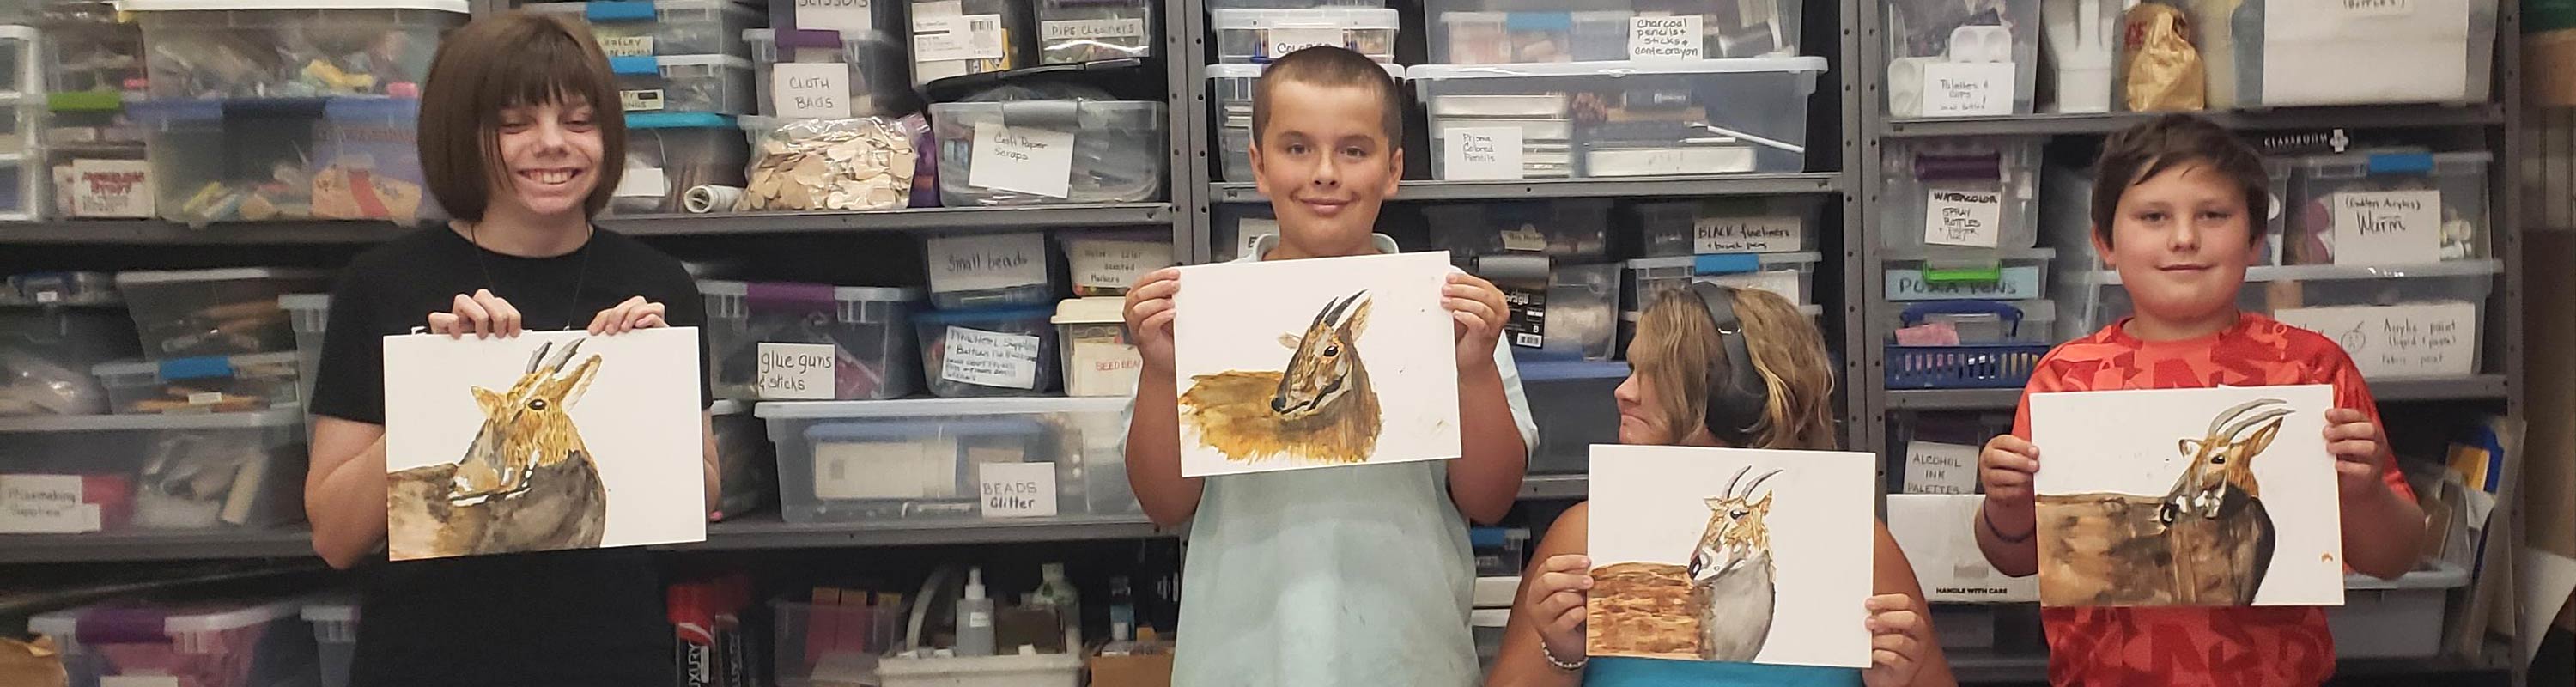 young artists who participated in our YAE (Young Artist Experience) Art Club classes